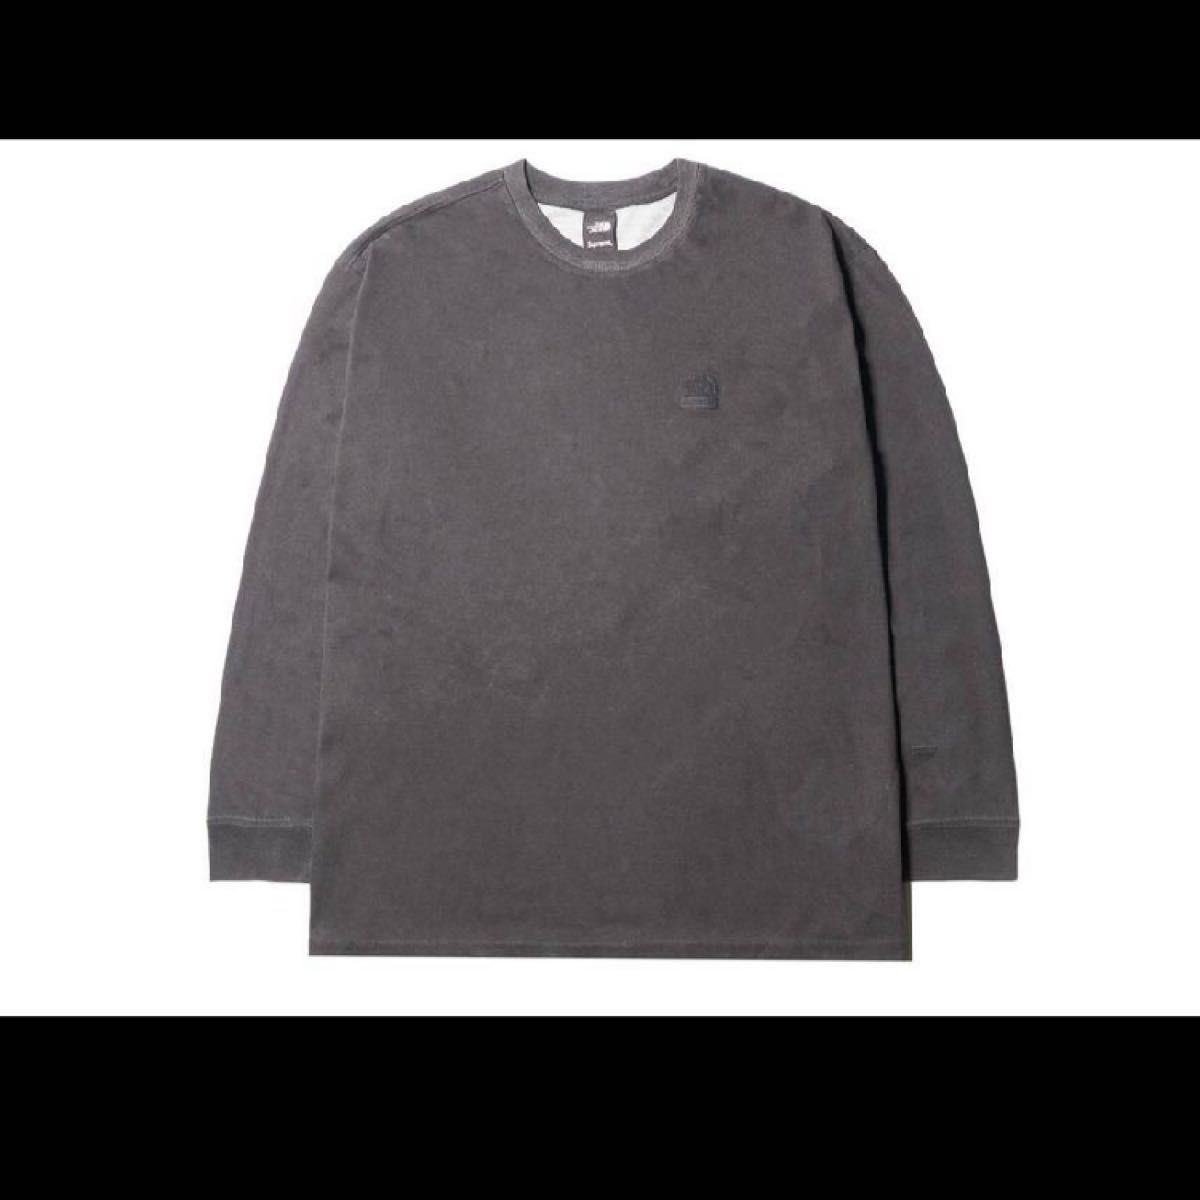 Supreme TNF Pigment Printed L/S Top ロンT Tシャツ/カットソー(七分/長袖) 大型割引キャンペーン